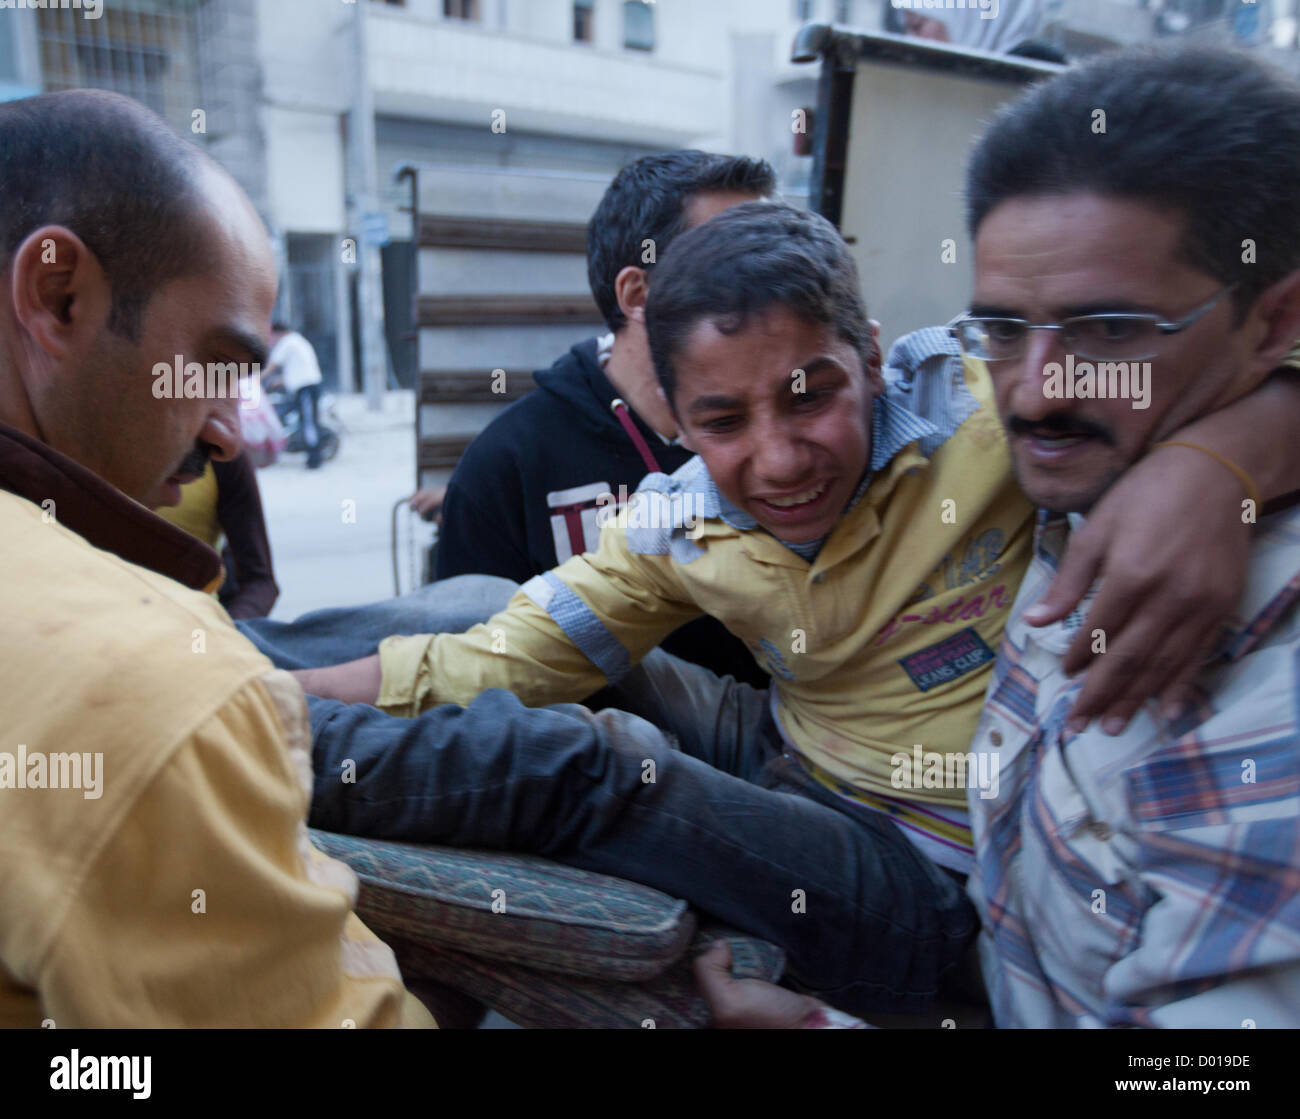 November 1, 2012 - Aleppo, Syria: A child is carried into a front line hospital to receive treatment for an injury. Stock Photo